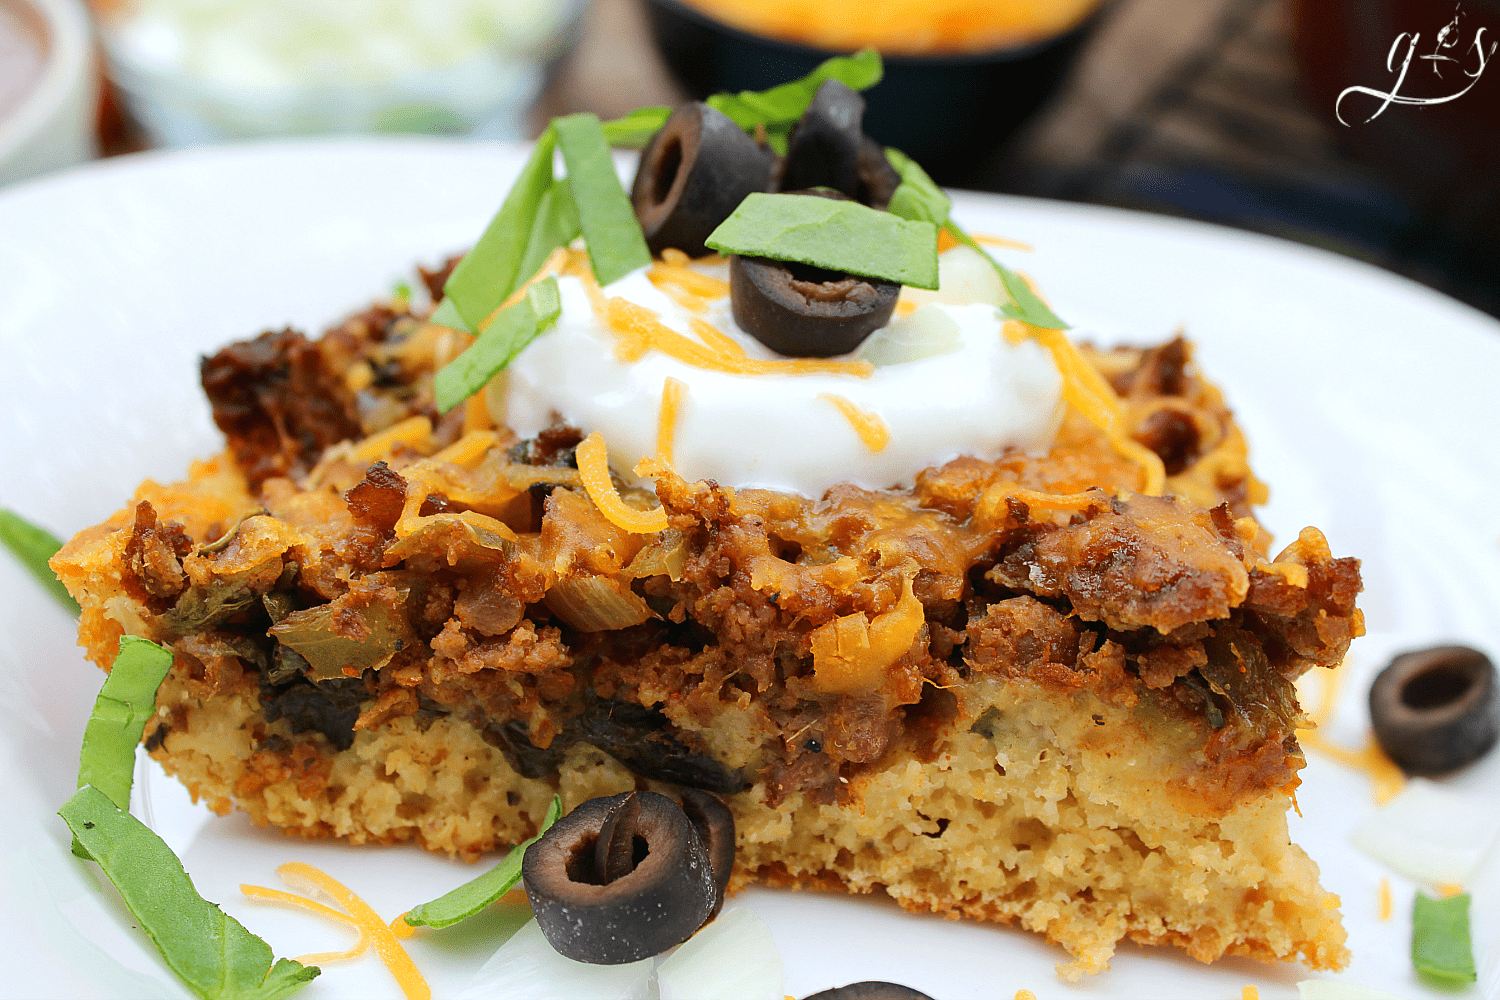 The BEST Clean Eating Mexican Cornbread Casserole | This healthy, easy, and gluten-free recipe contains no processed ingredients and TONS of veggies aka WHOLE FOODS like onion, spinach, bell pepper, and salsa! It can be made with ground beef or any other meat such as buffalo, venison, or ground turkey. If you are looking for a new from scratch homemade family meal this one's for you! 